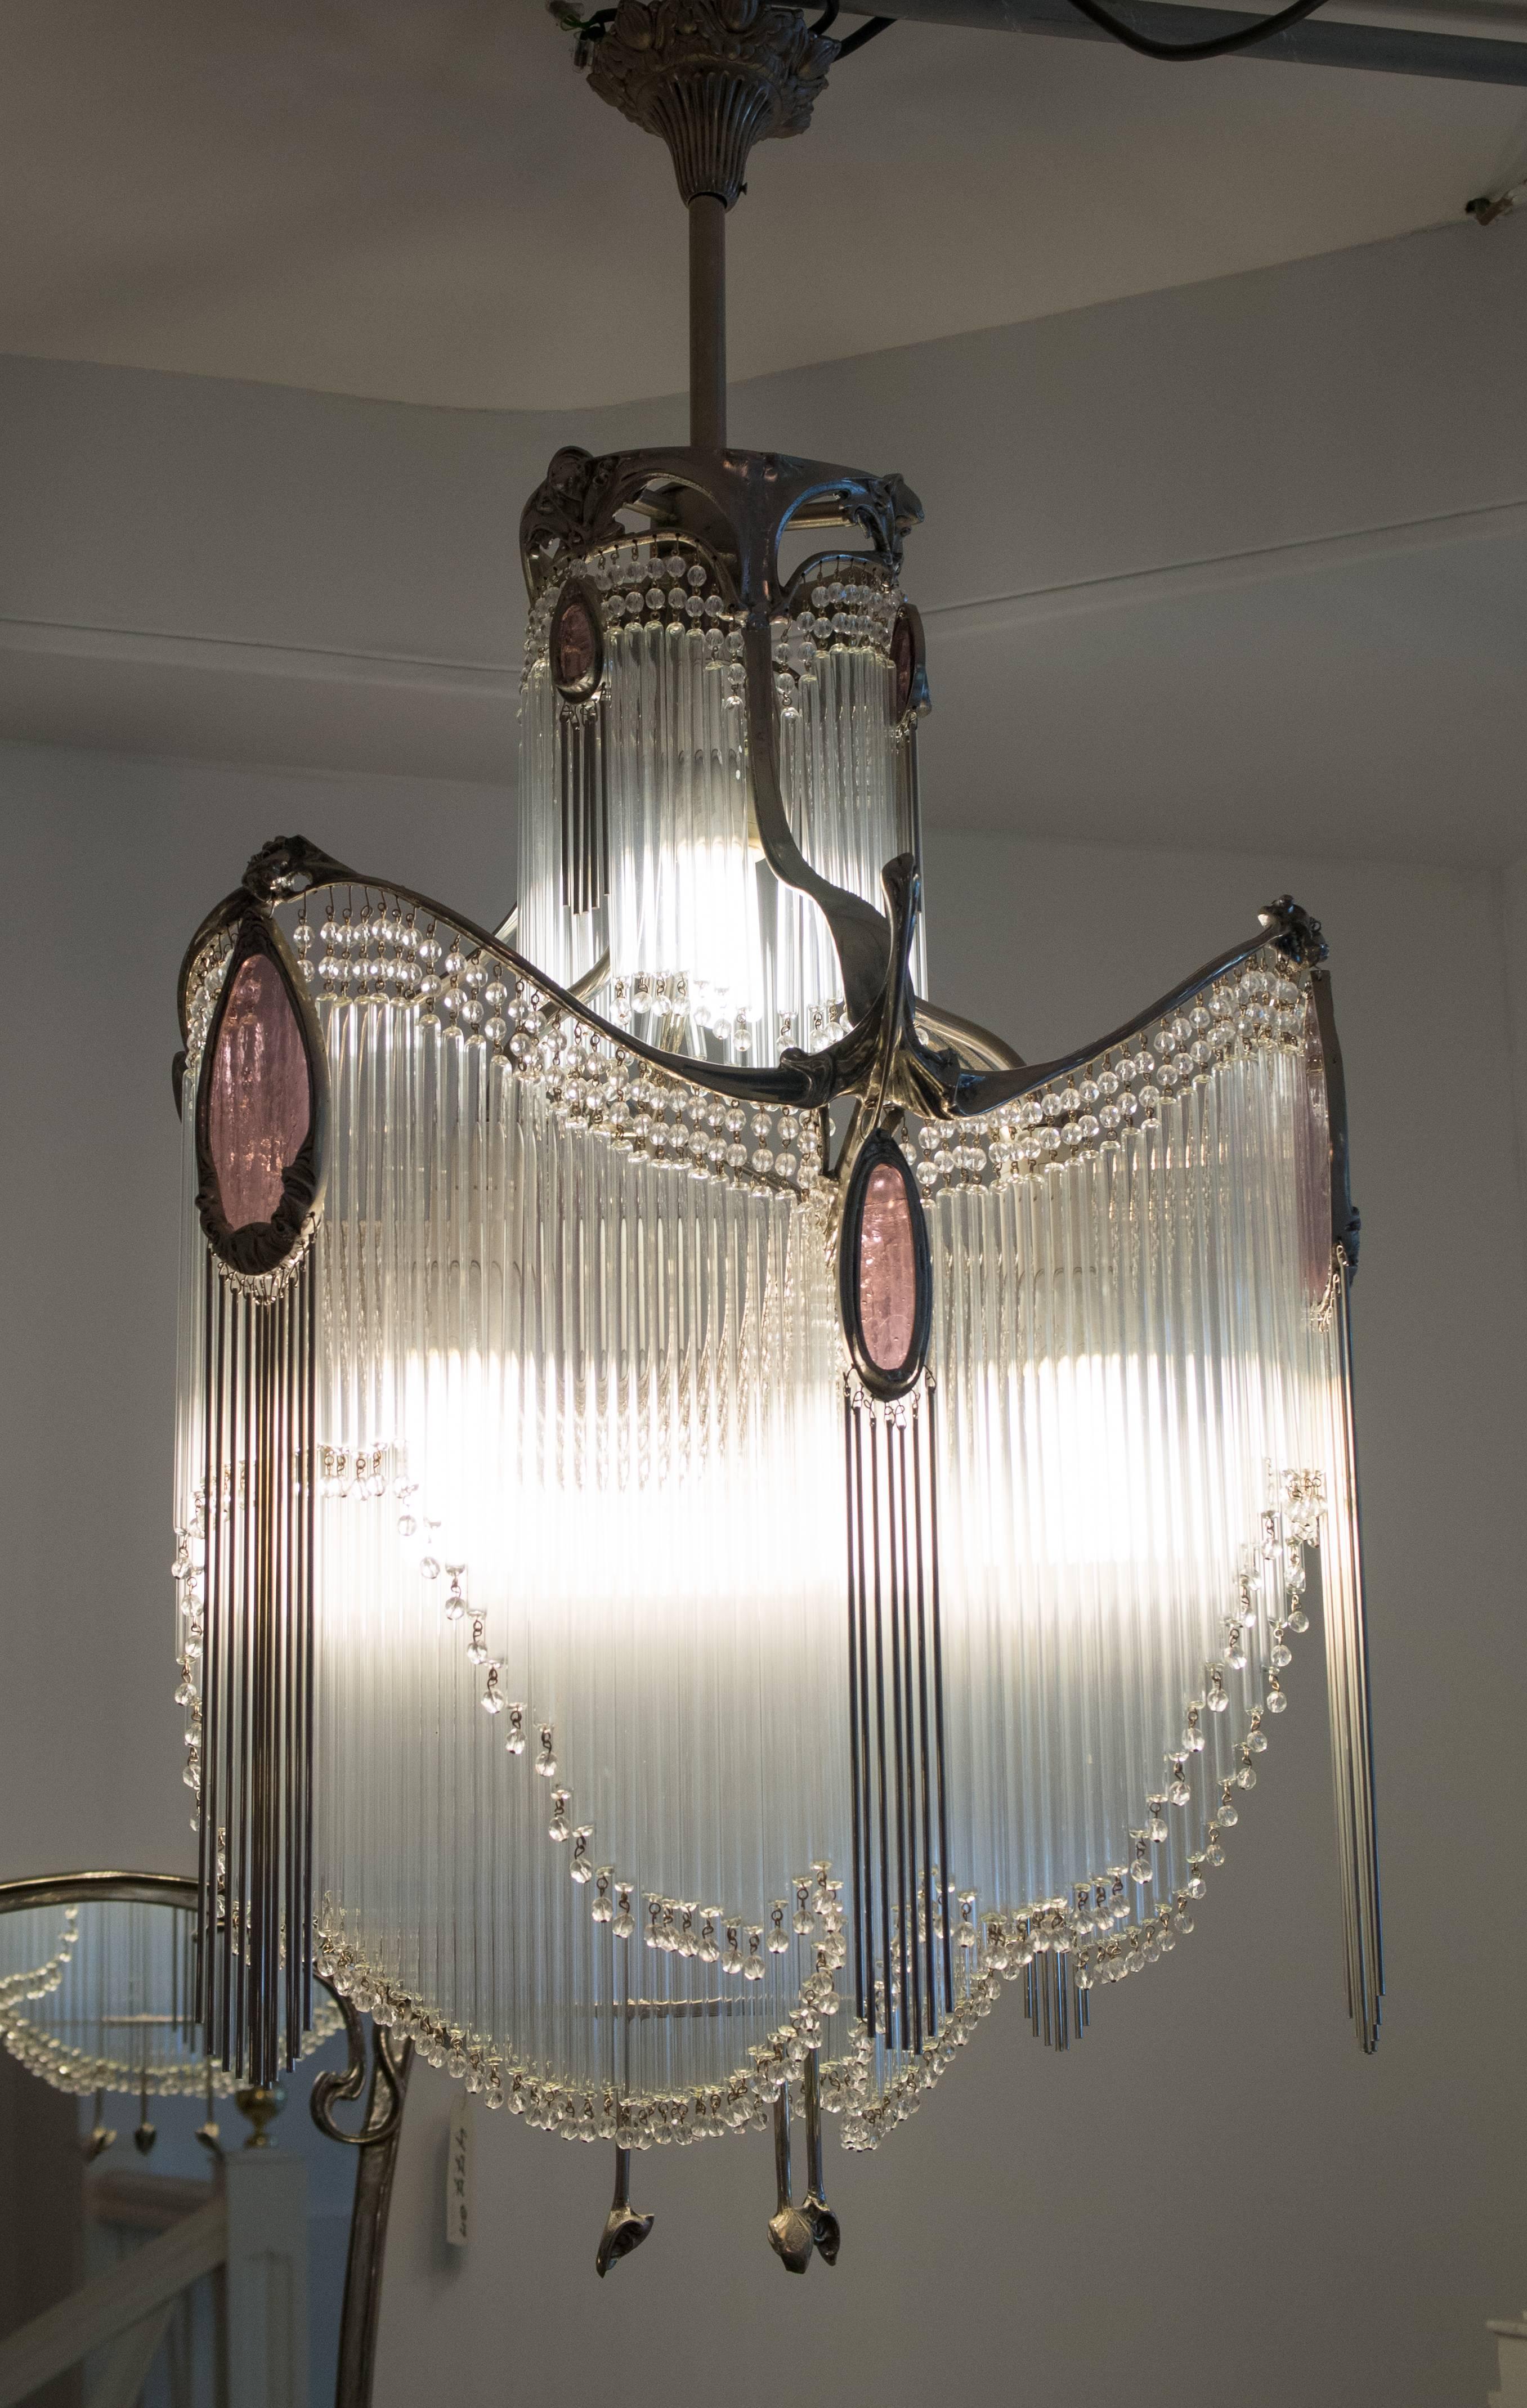 Art Nouveau bronze chandelier with nickel patinated finish and glass tubes.